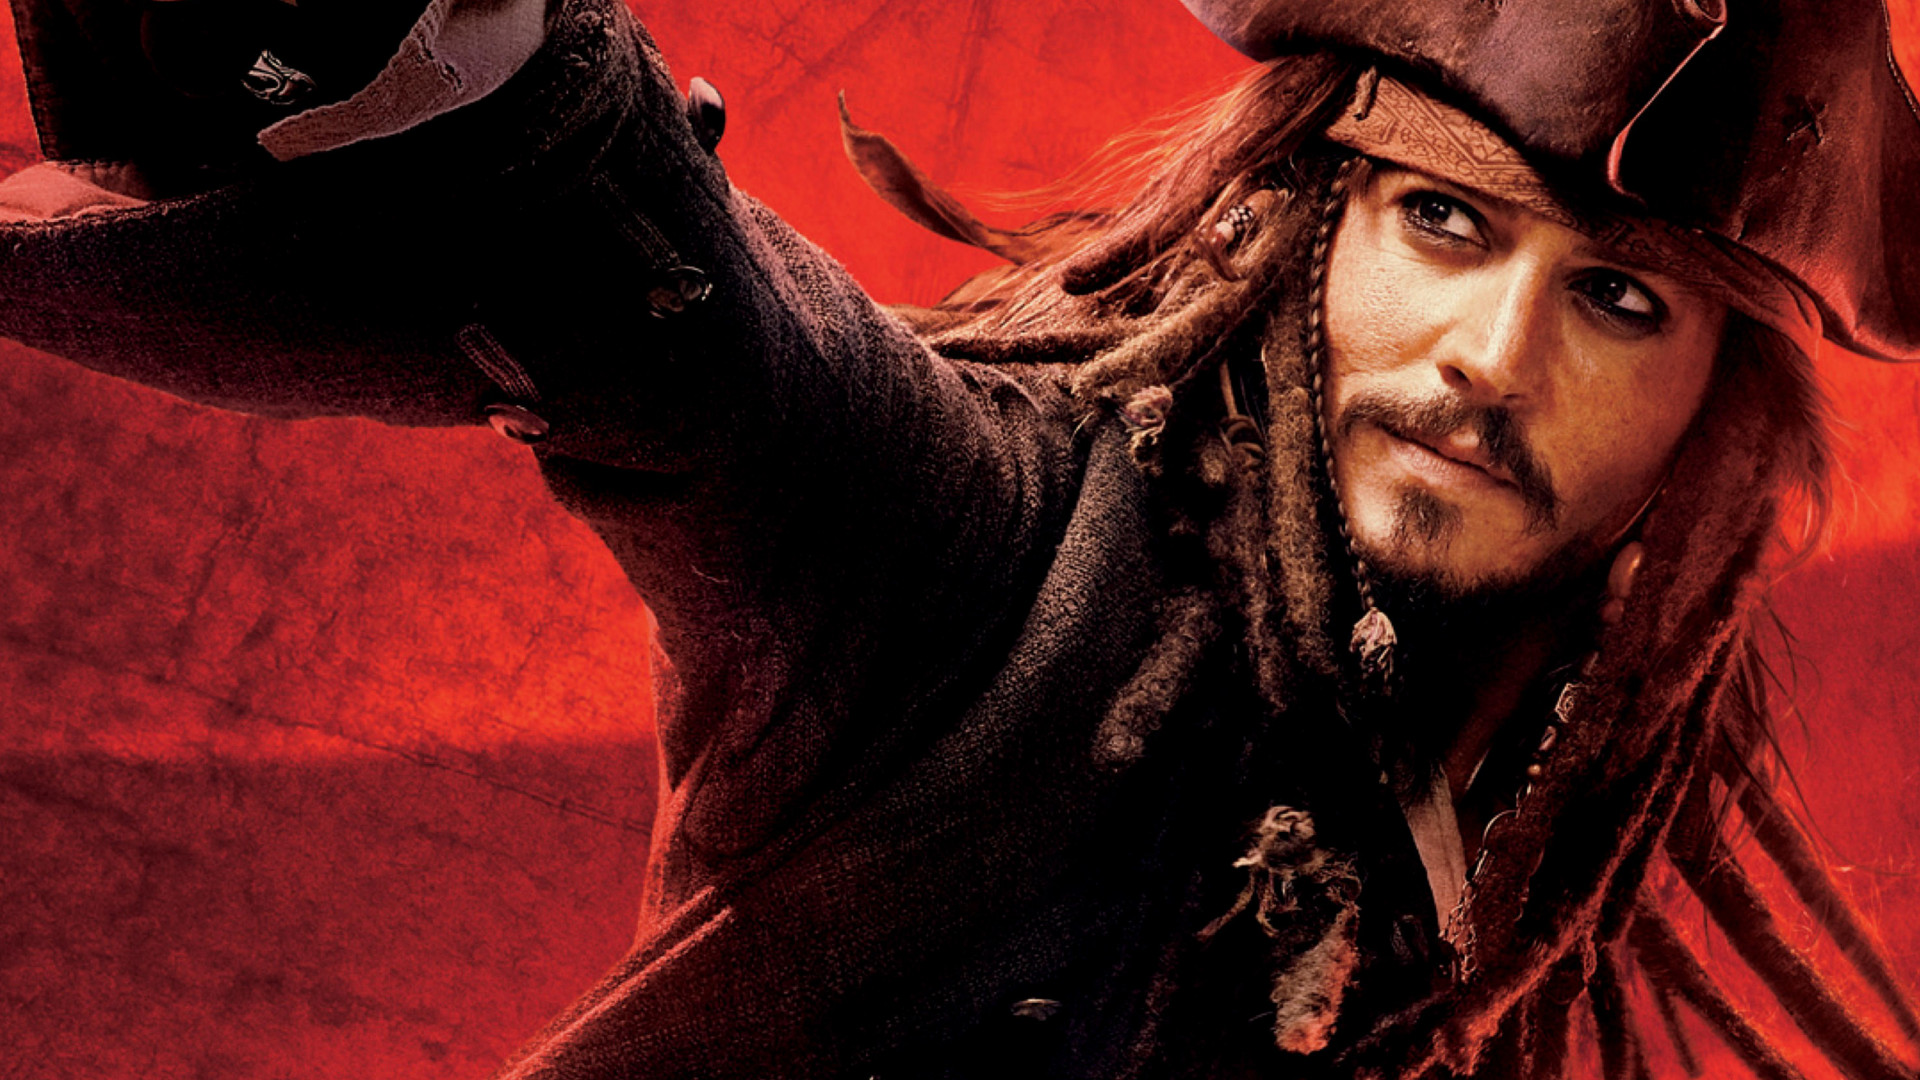 movie, pirates of the caribbean: at world's end, jack sparrow, johnny depp, pirates of the caribbean cell phone wallpapers